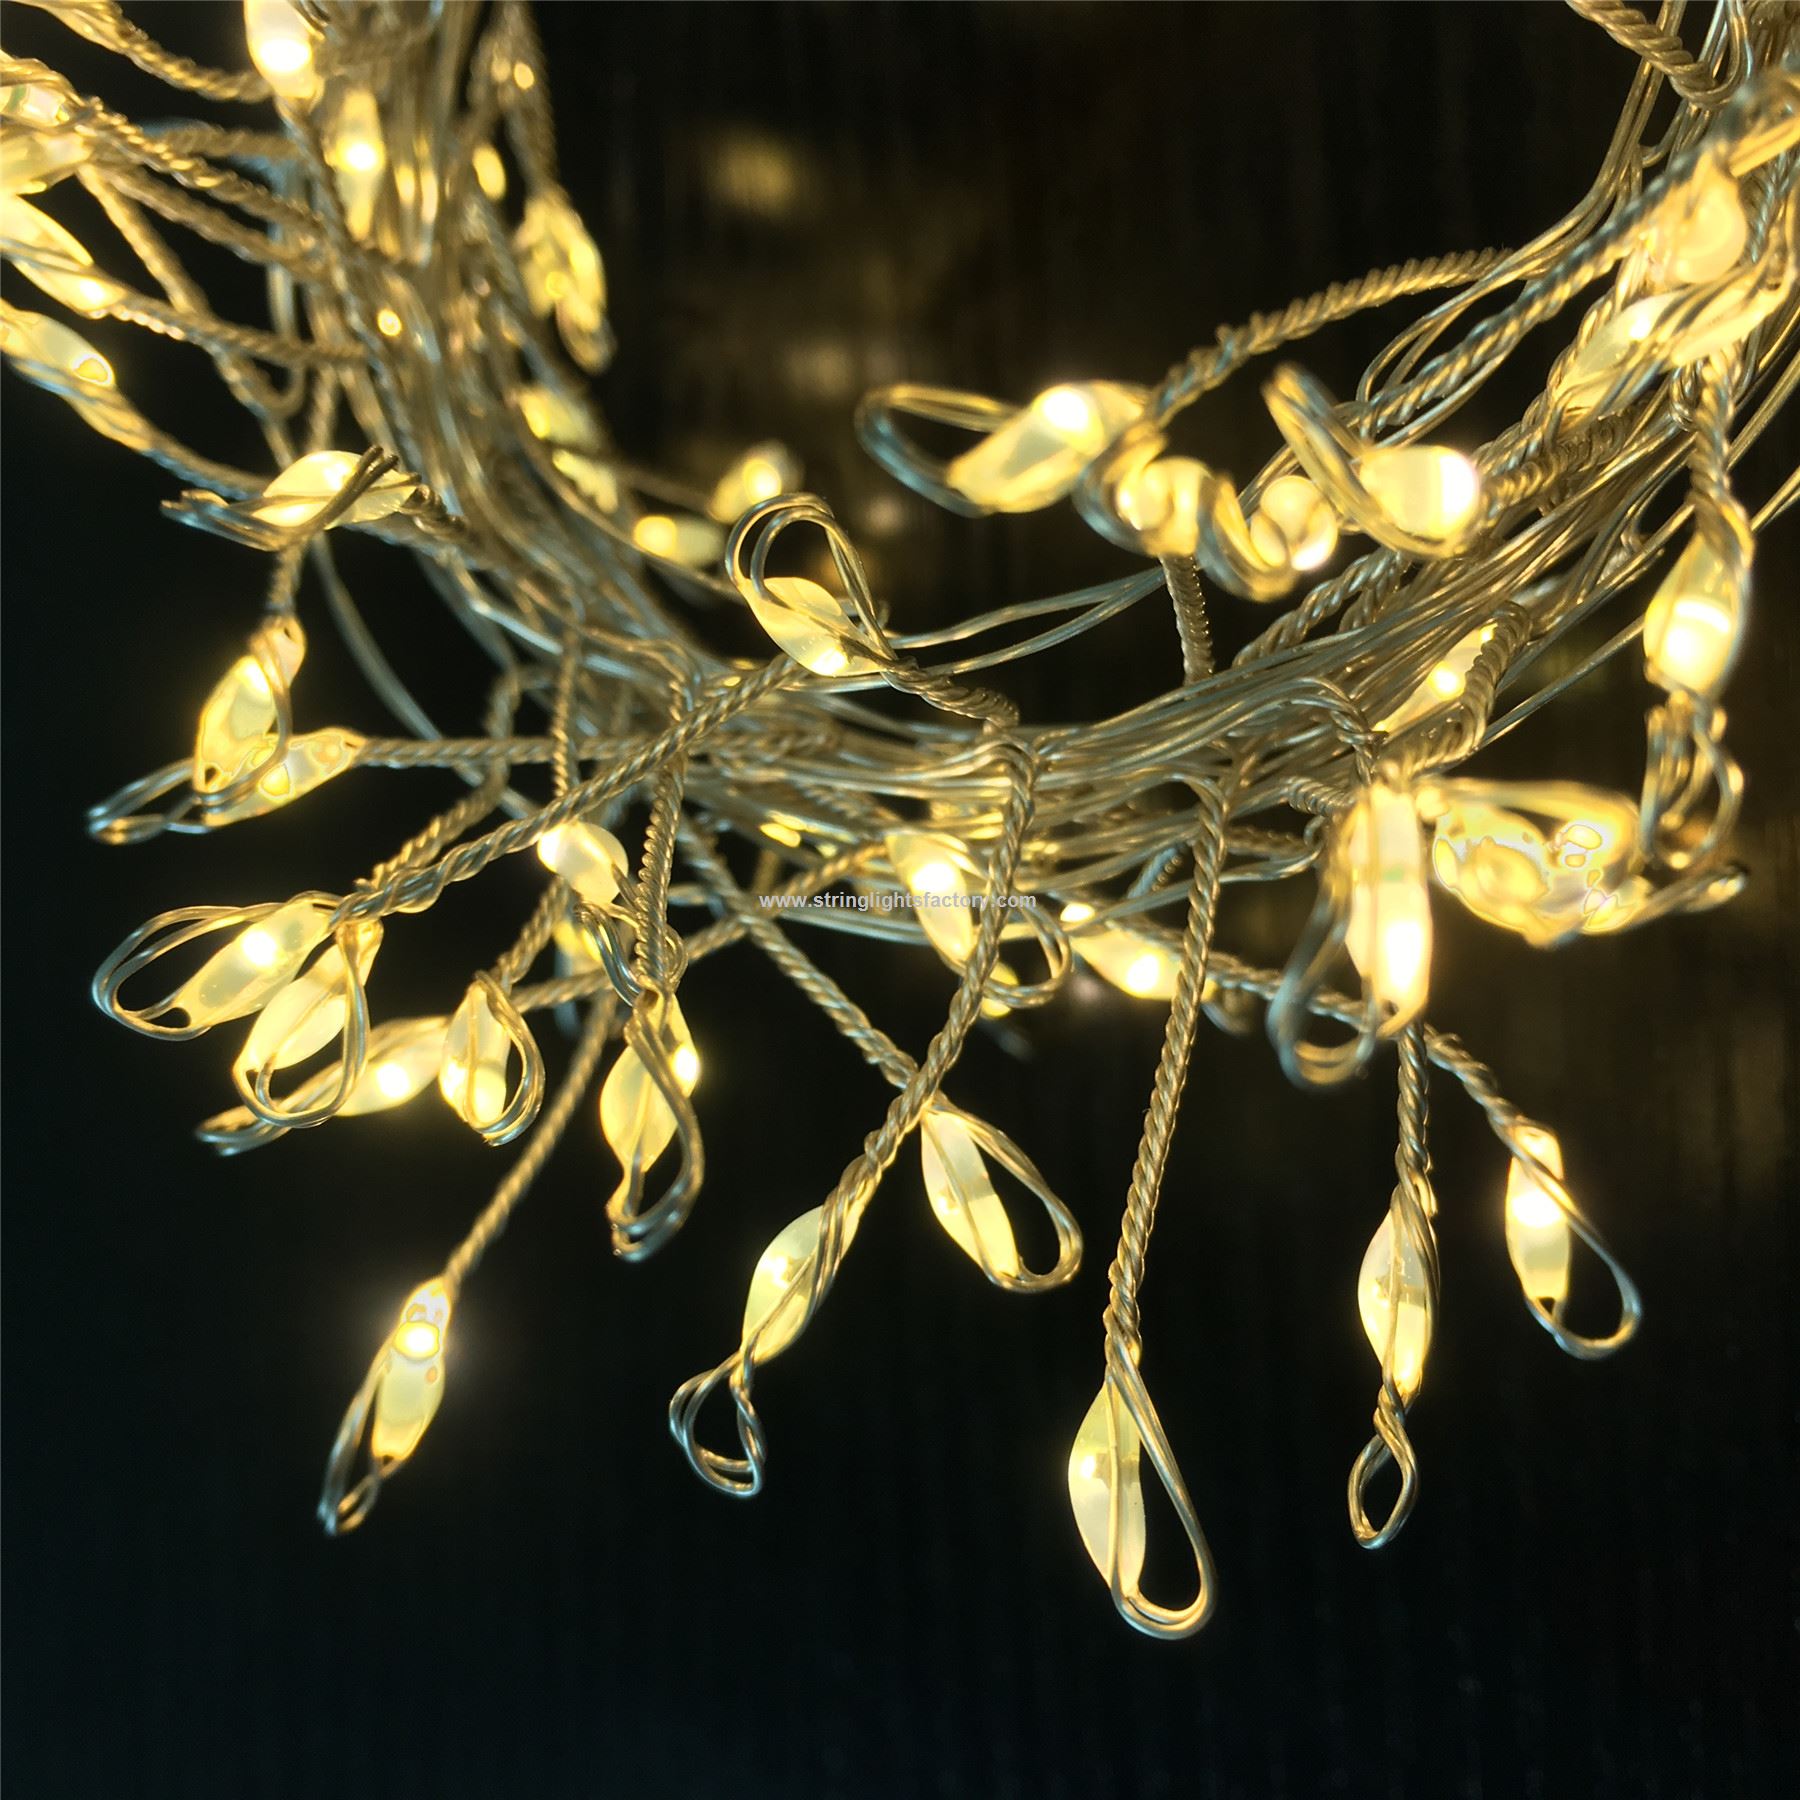 Garland Cluster Fairy Lights 9.84FT Copper Wire 100 Warm White LEDs